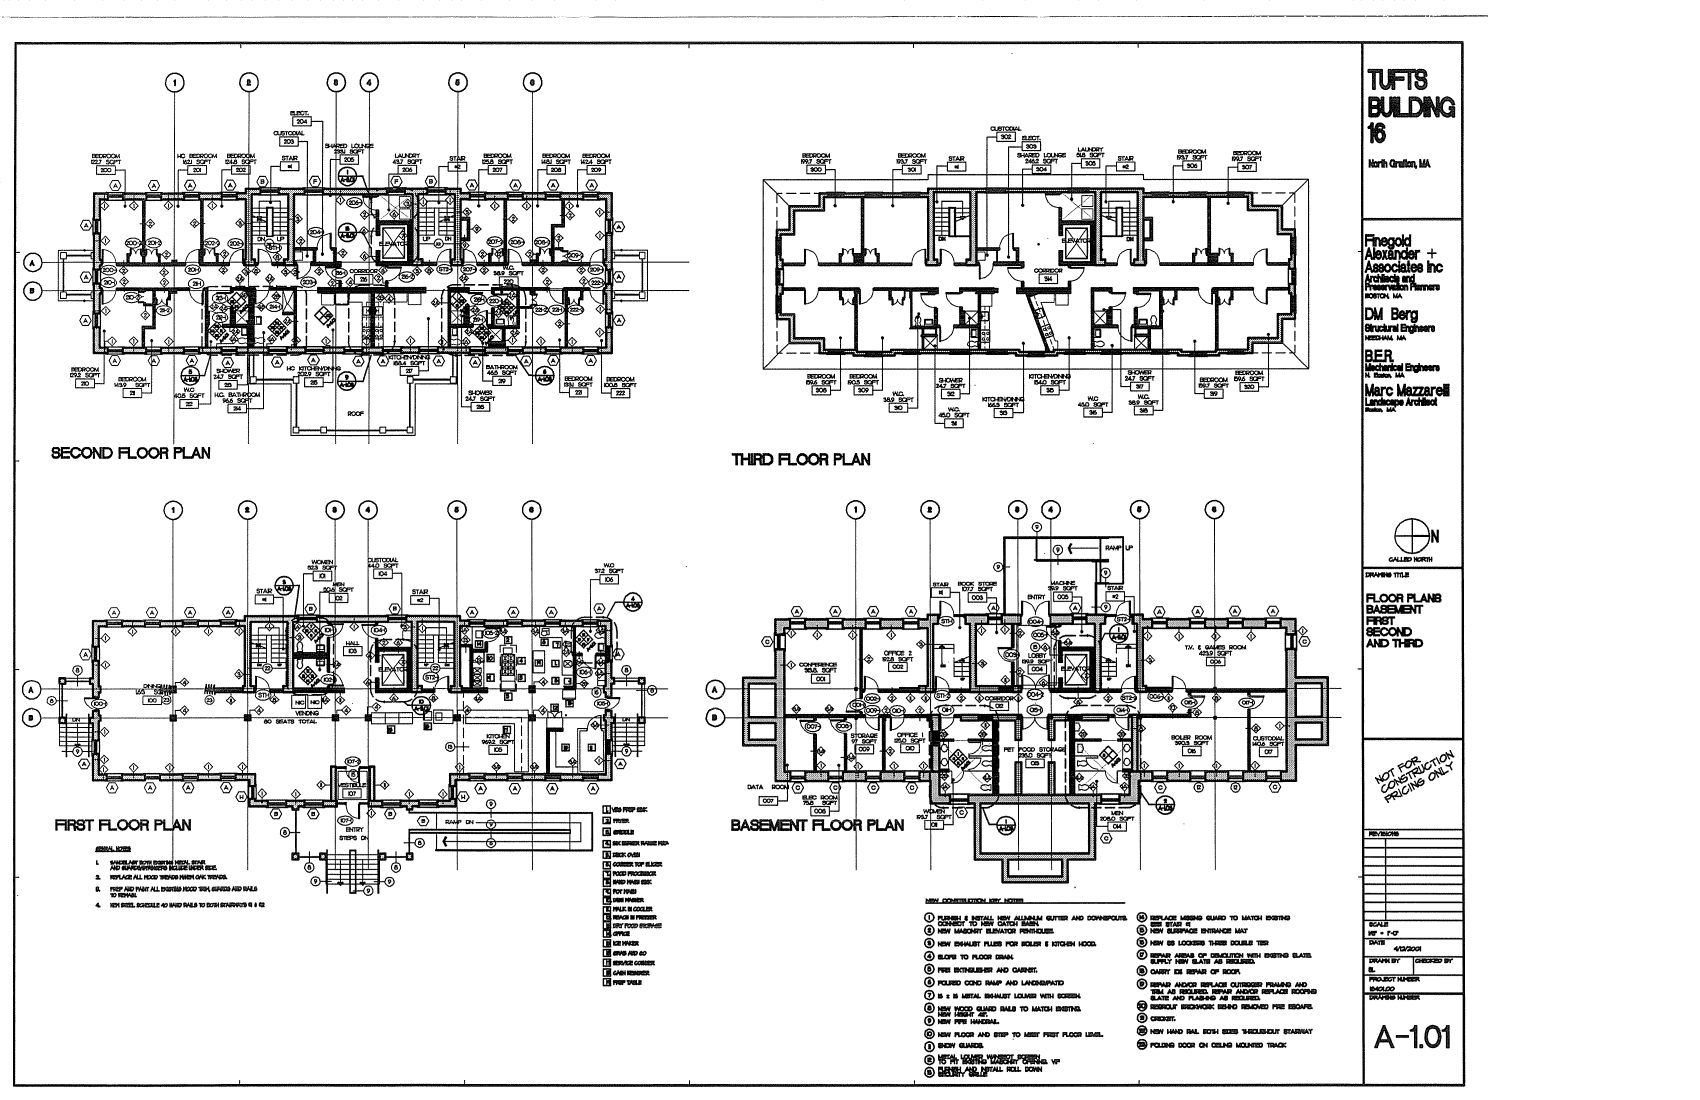 TUFTS UNIVERDITY, BUILDING 16 A-1.01 FLOOR PLANS - BASEMENT, FIRST, SECOND AND THIRD